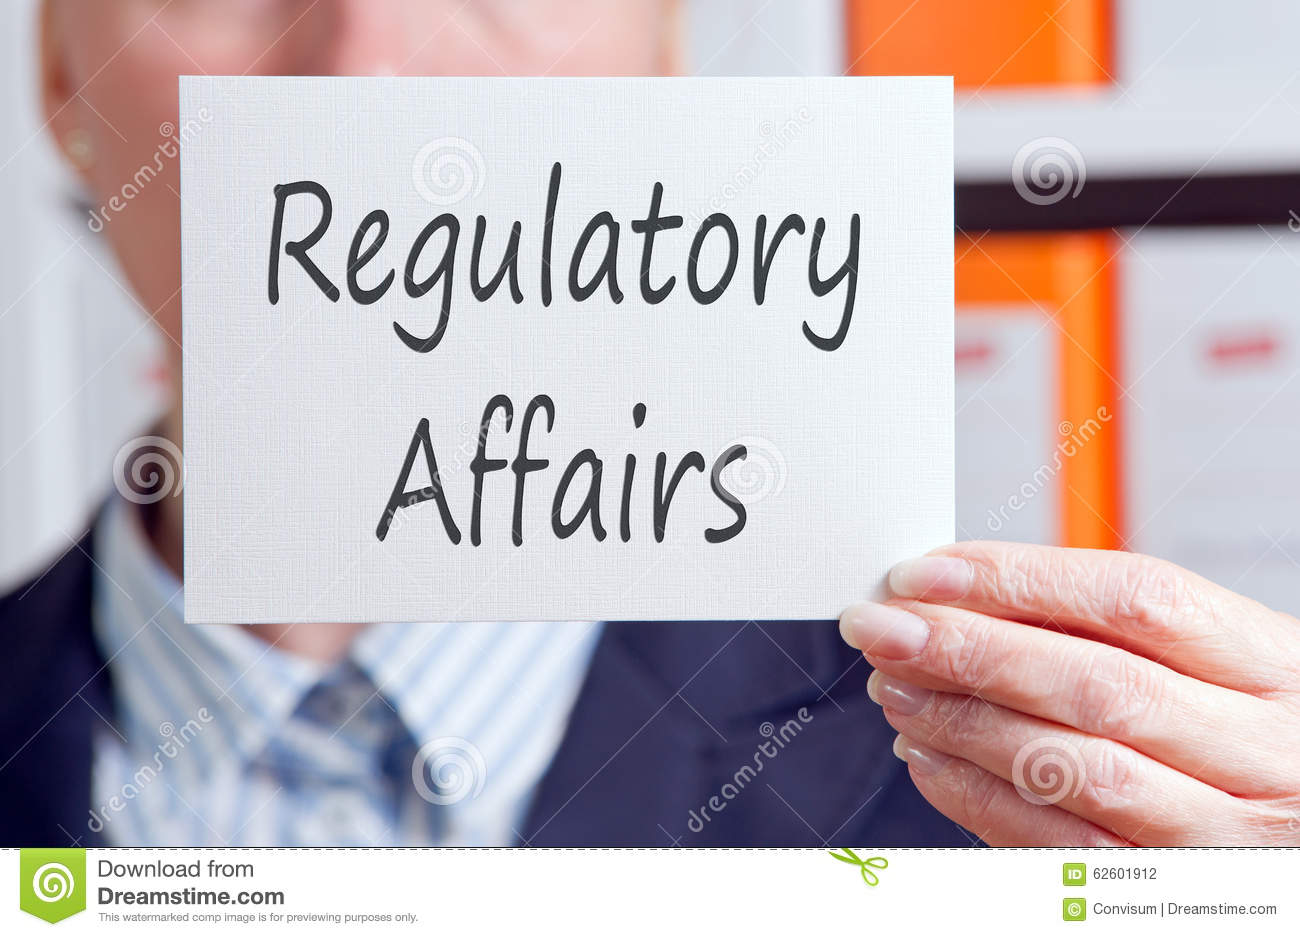 PMD610 & PMD611 (2567) Regulatory affairs and product registration & Advanced product registration